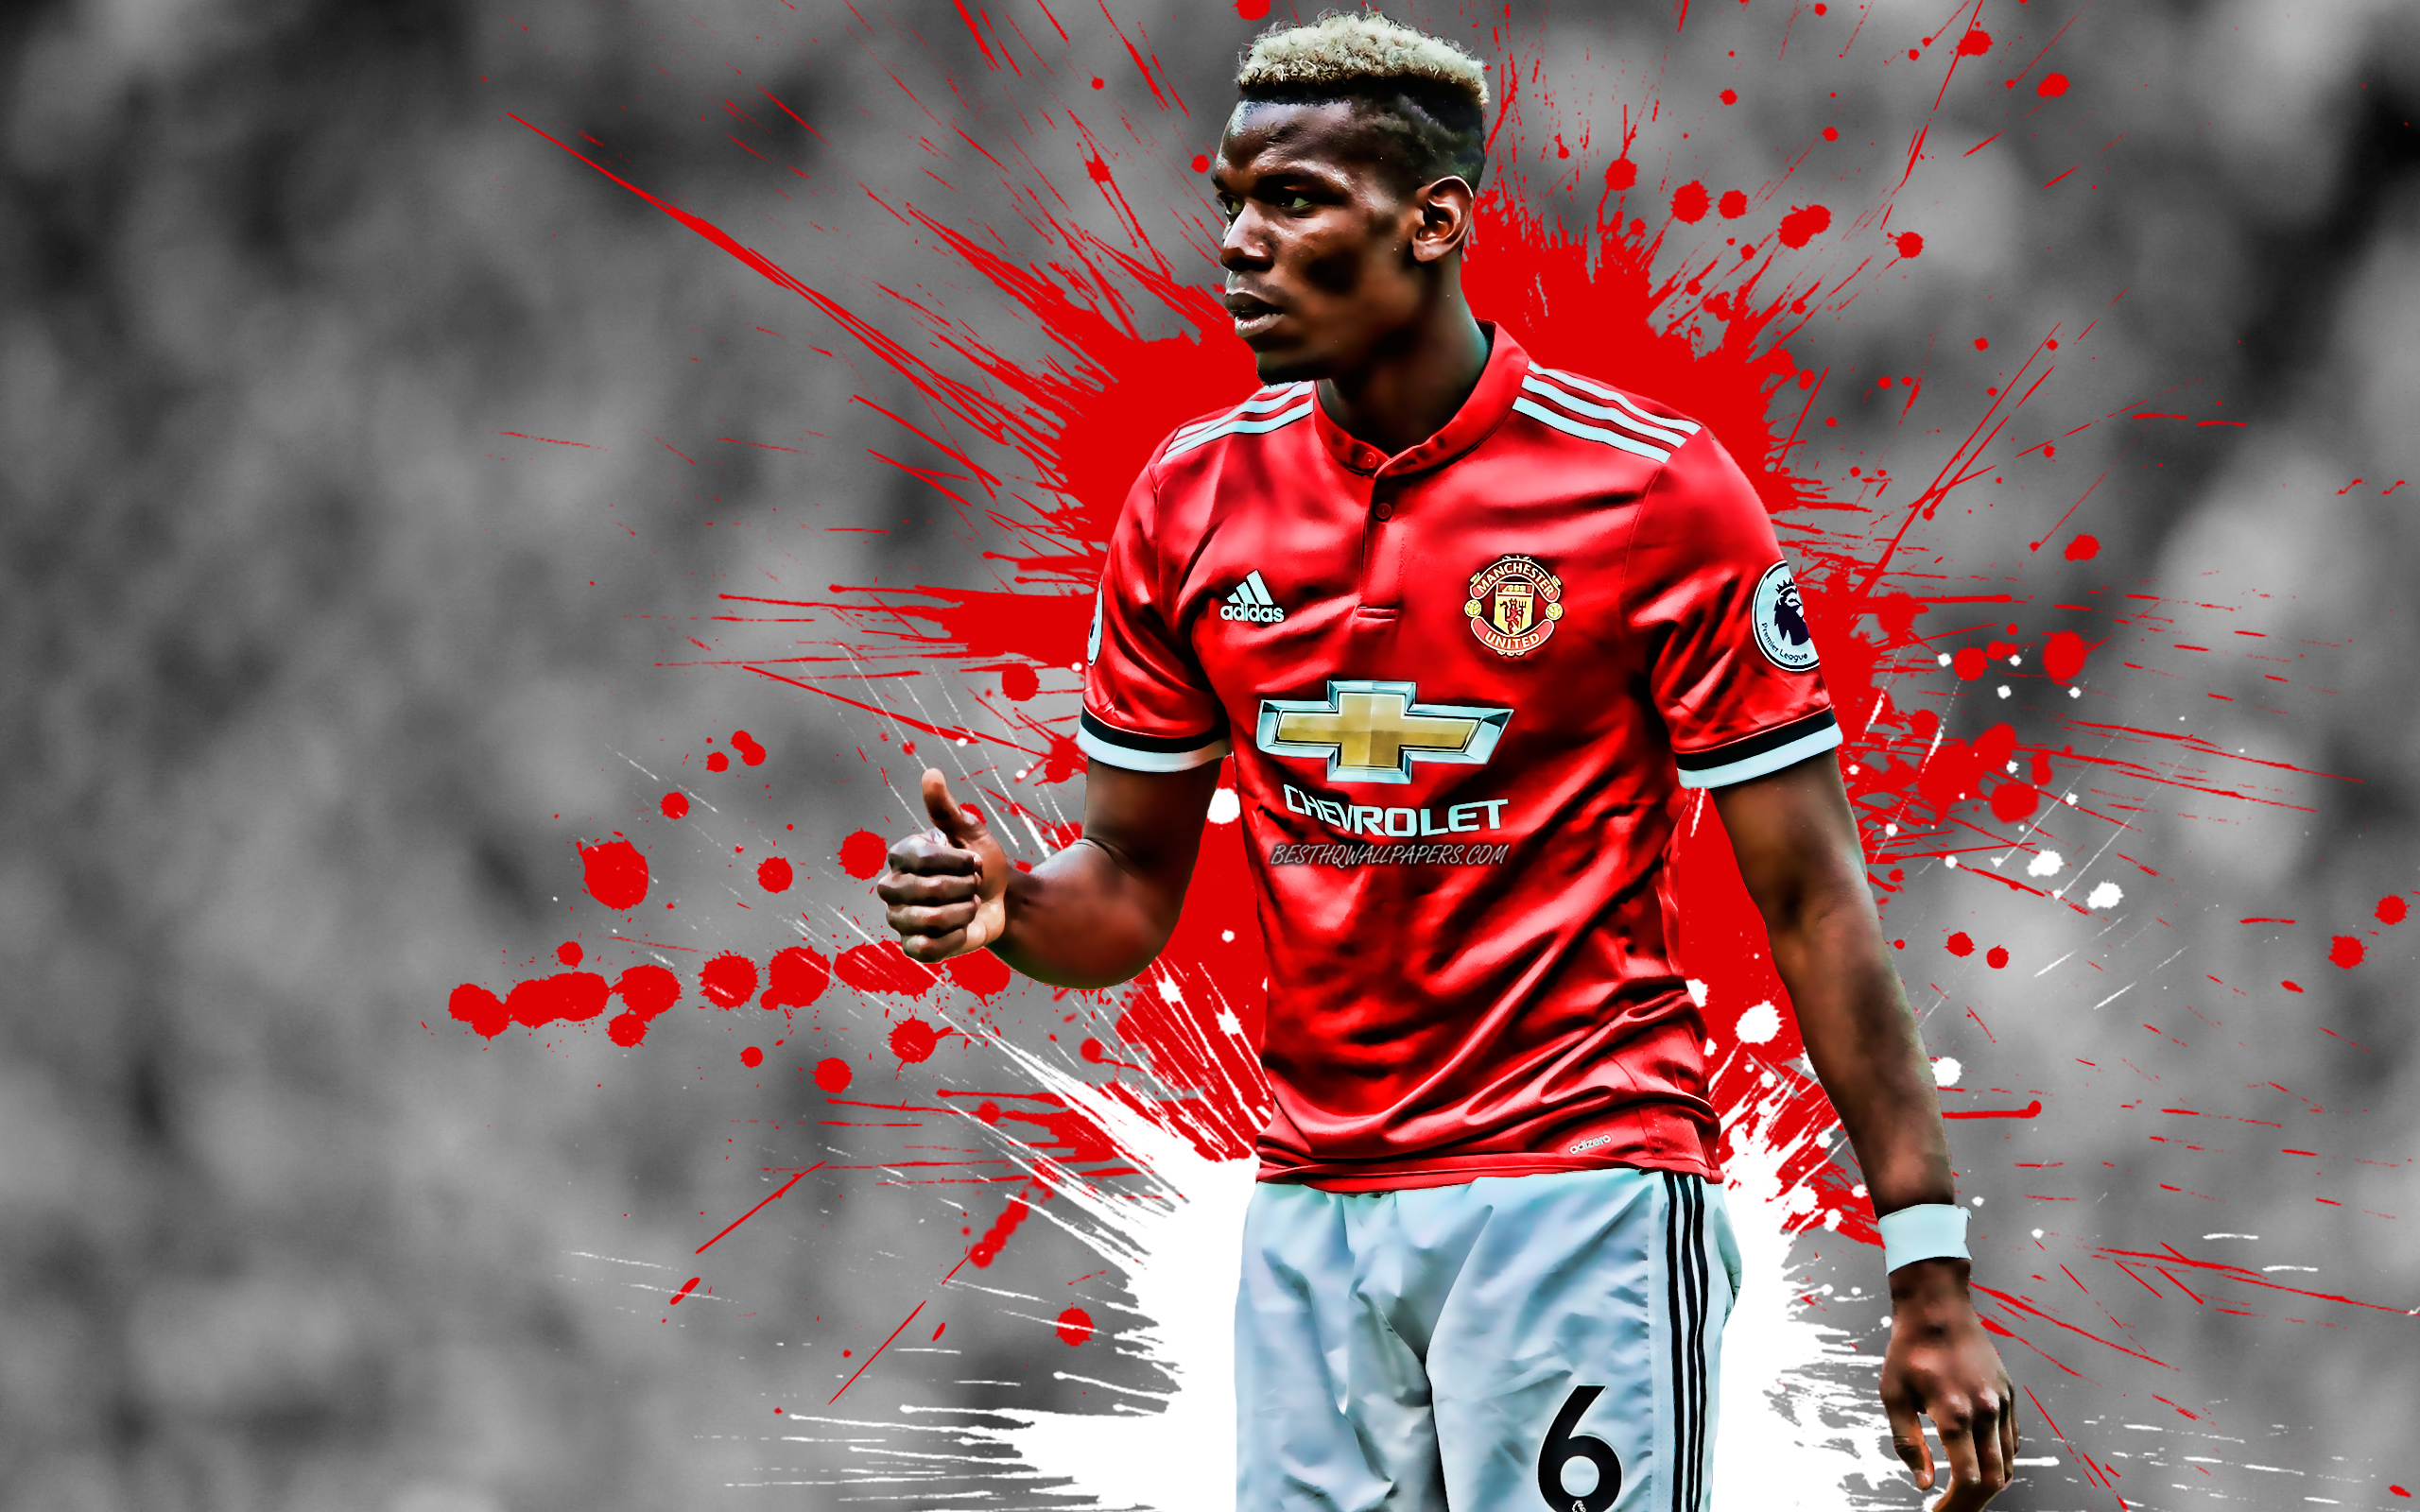 Download wallpaper Paul Pogba, Manchester United FC, French footballer, midfielder, goal, joy, portrait, Premier League, England, famous footballers, creative art, football, Pogba for desktop with resolution 2560x1600. High Quality HD picture wallpaper